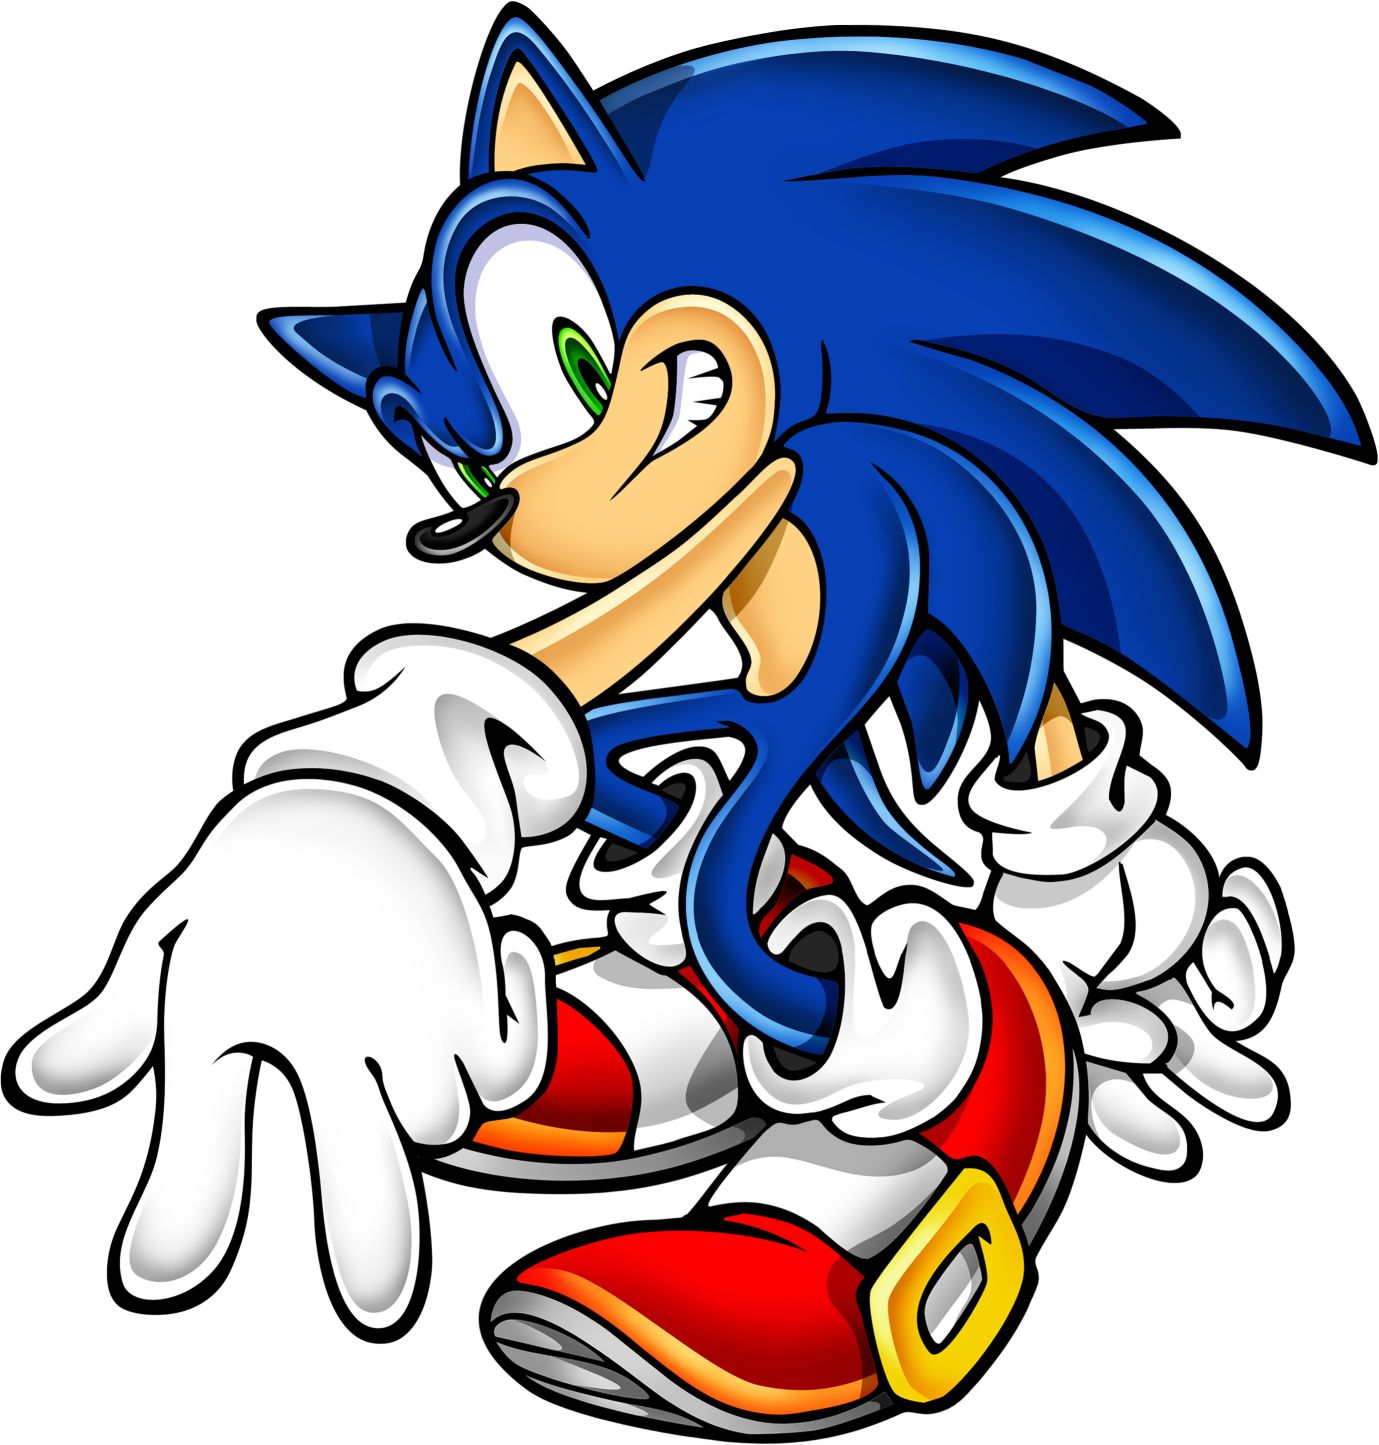 Sonic the Hedgehog (character 001)